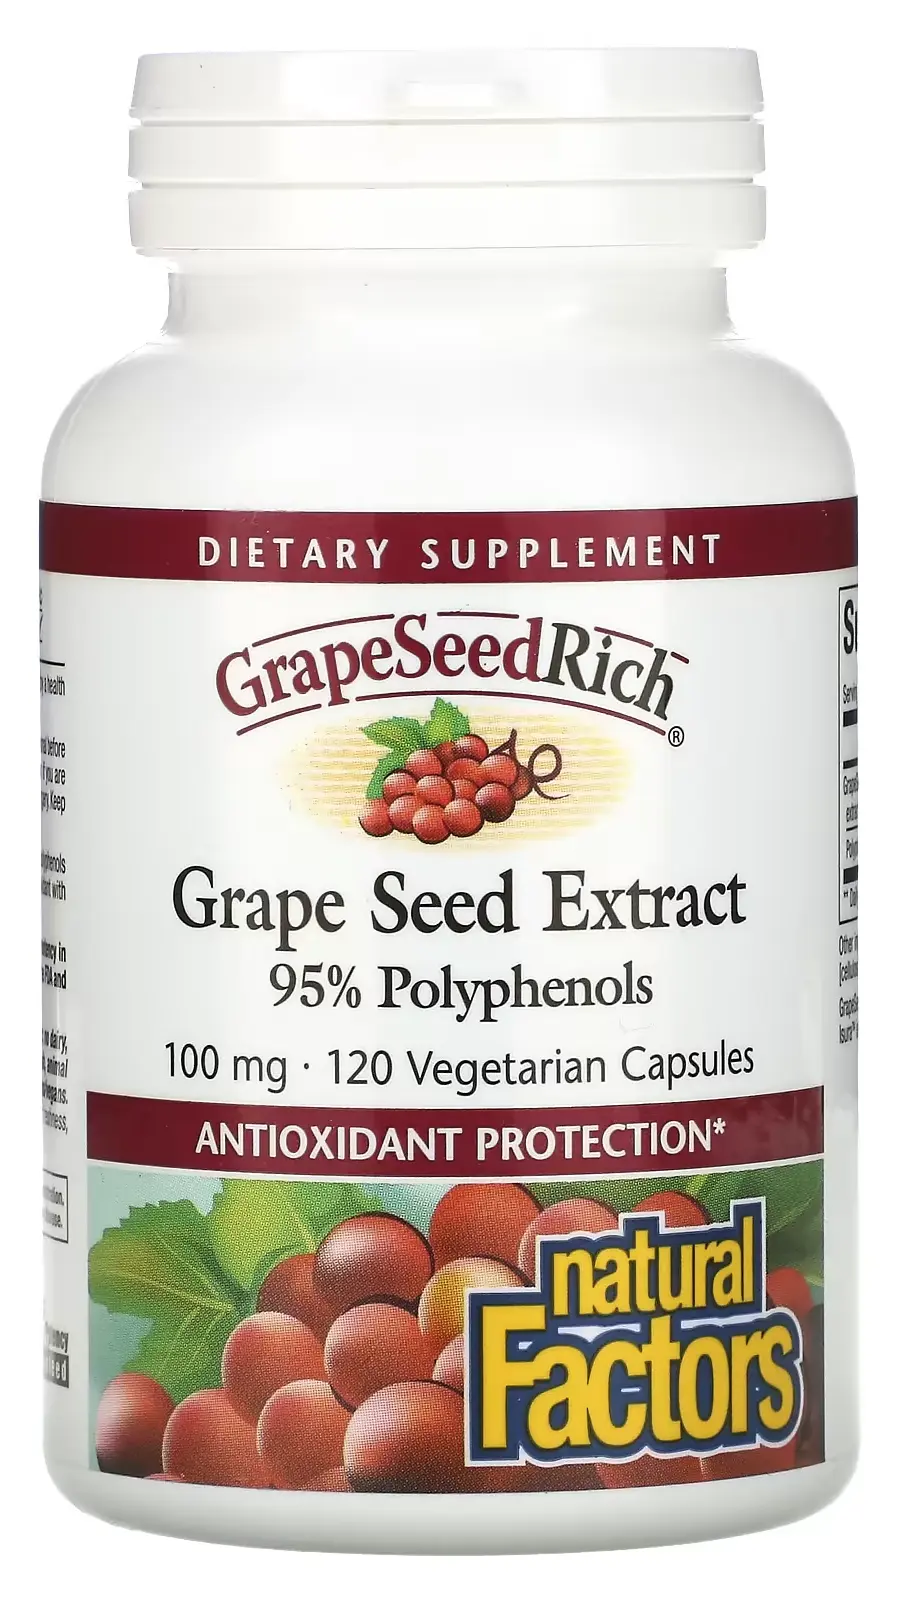 БАД Natural Factors GrapeSeedRich, Grape Seed Extract, 100 мг, 120 веганских капсул (NFS-04540)